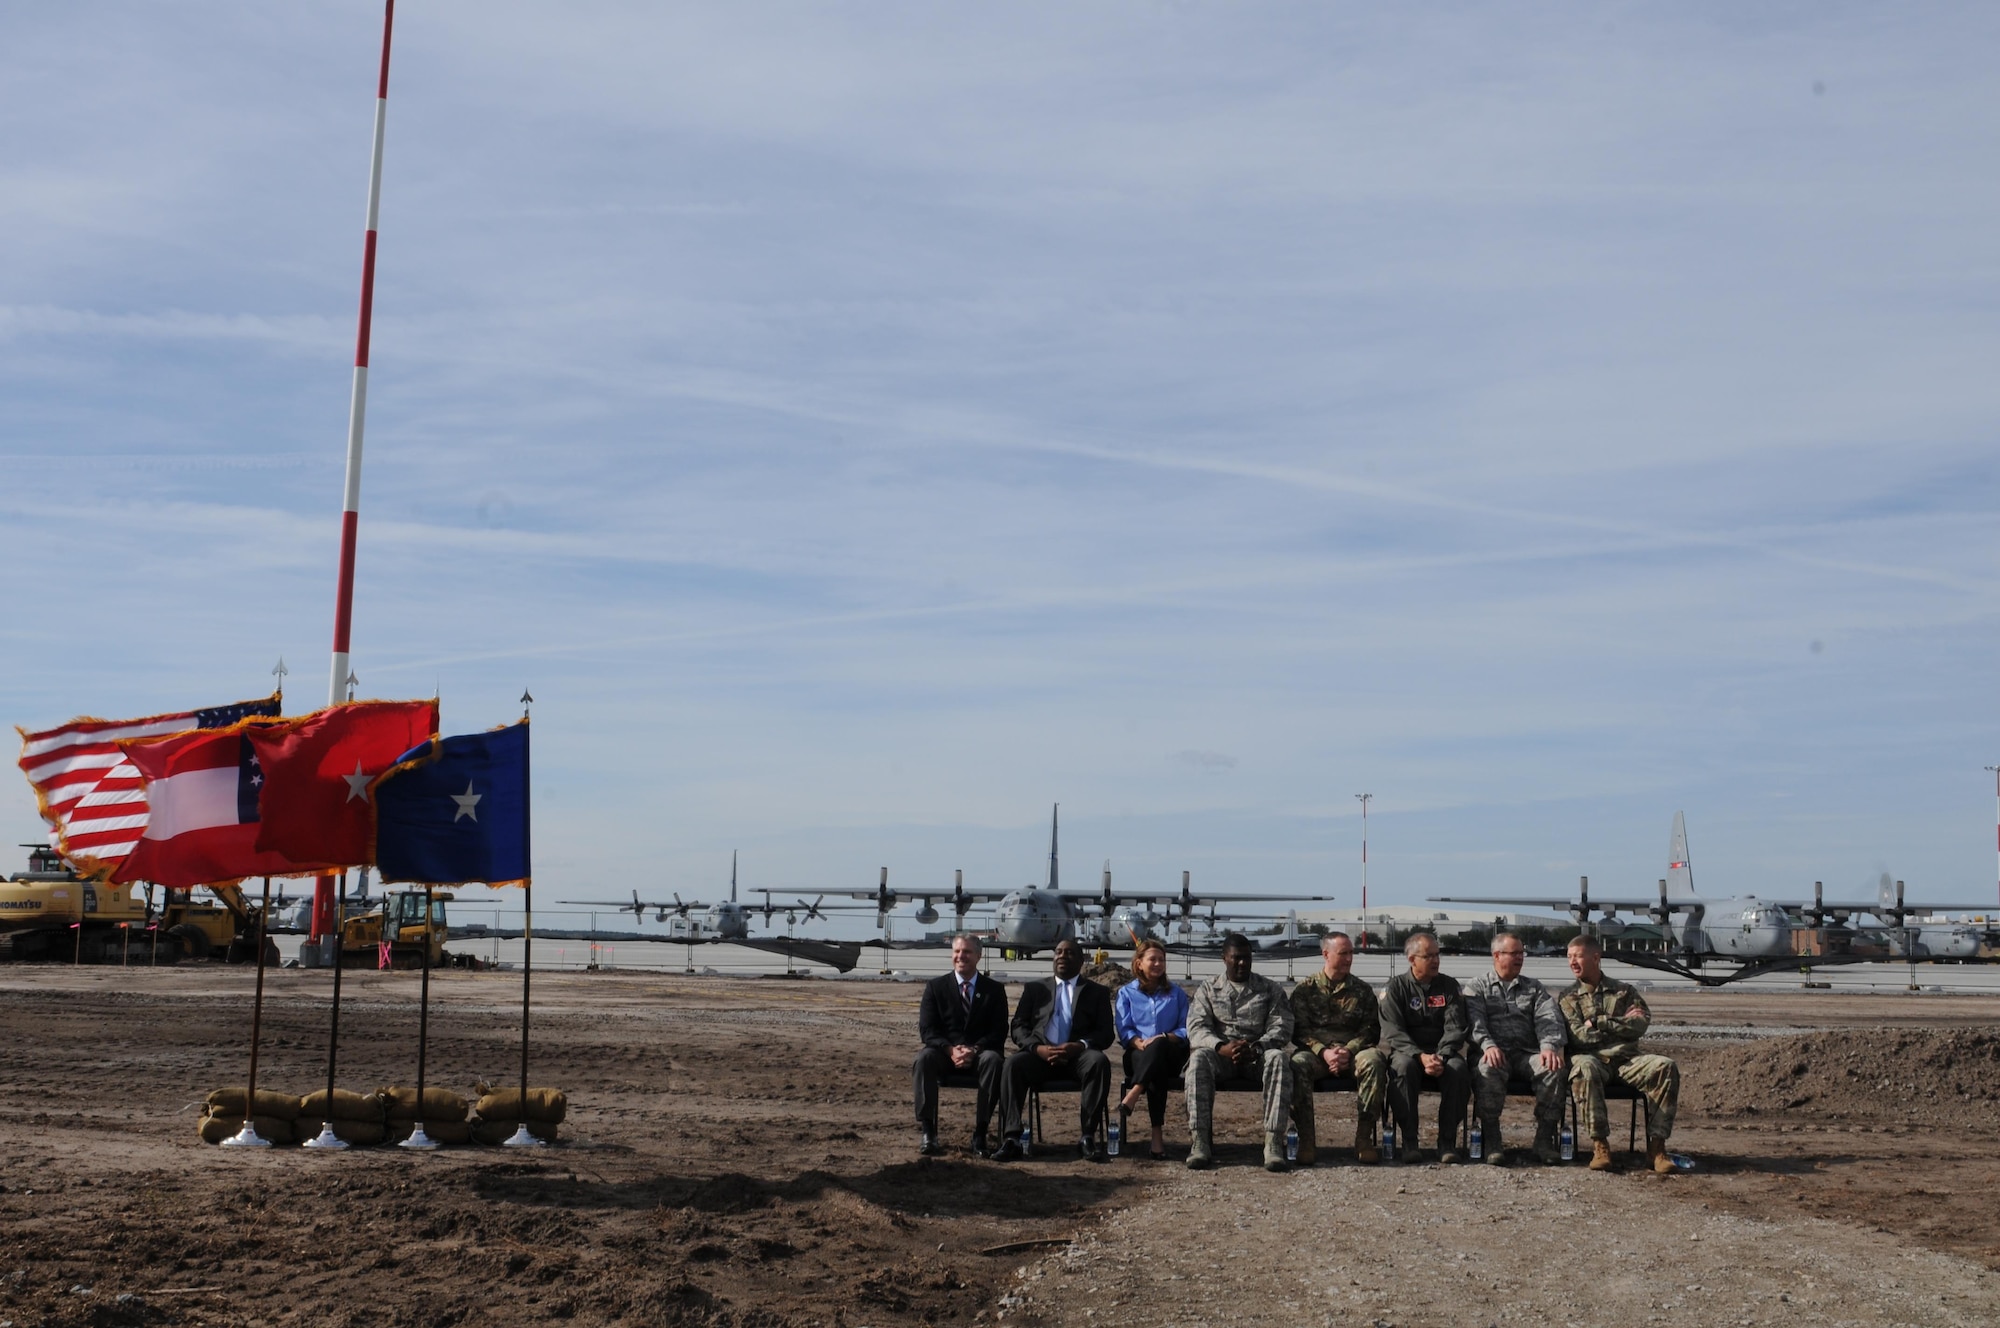 The 165th Airlift Wing hosted a ground breaking ceremony for the new Squadron Operations building near the flight line Jan. 4, 2017. (U.S. Air National Guard photo by Tech. Sgt. Amber Williams)